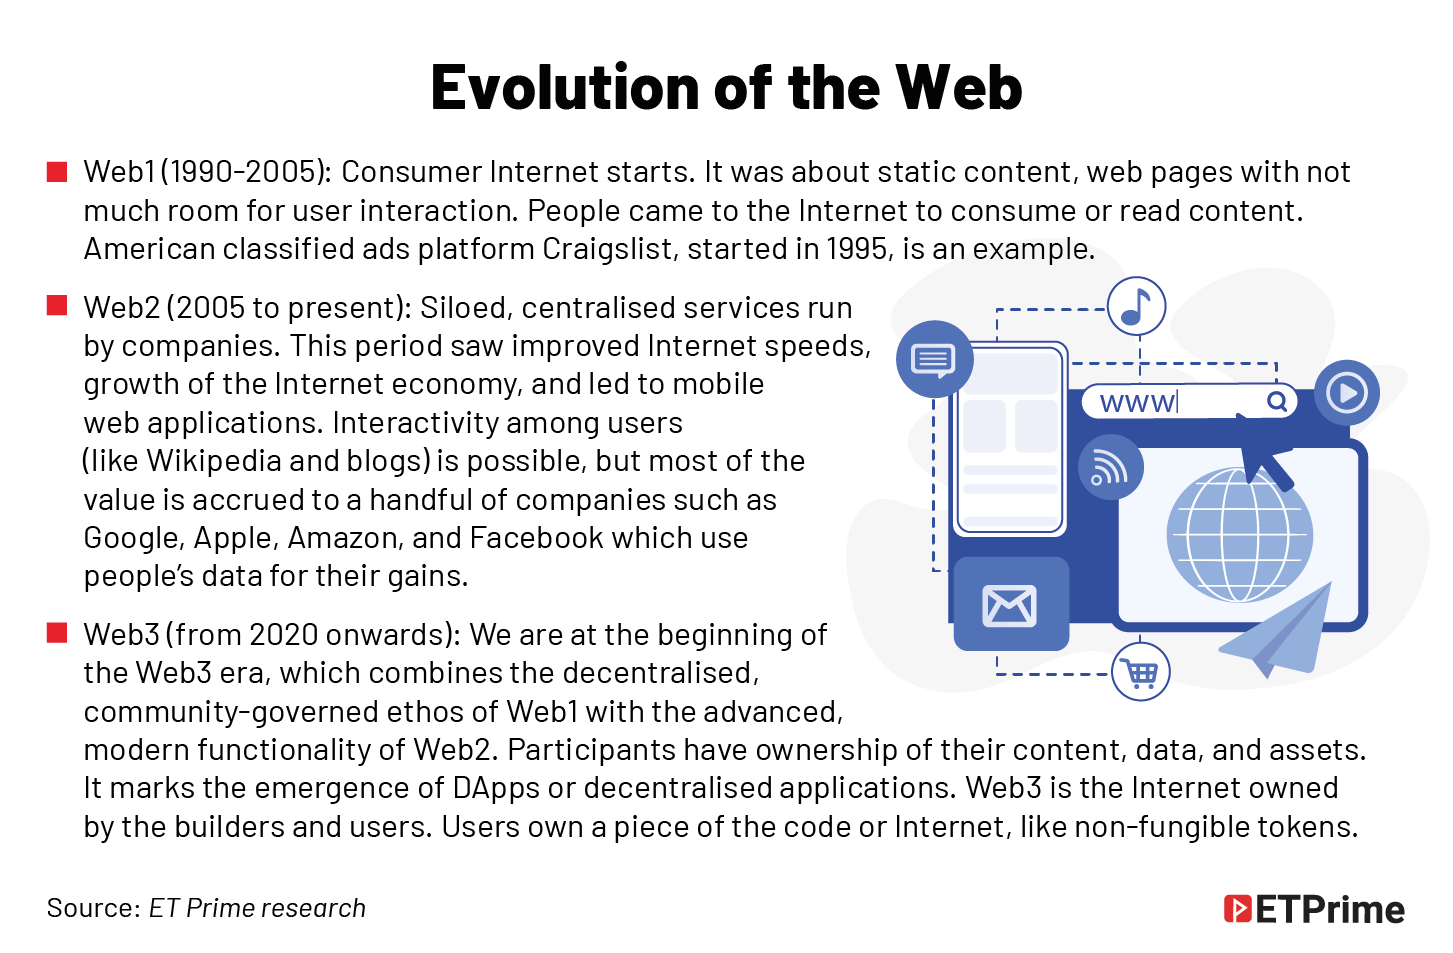 Evolution of the web@2x